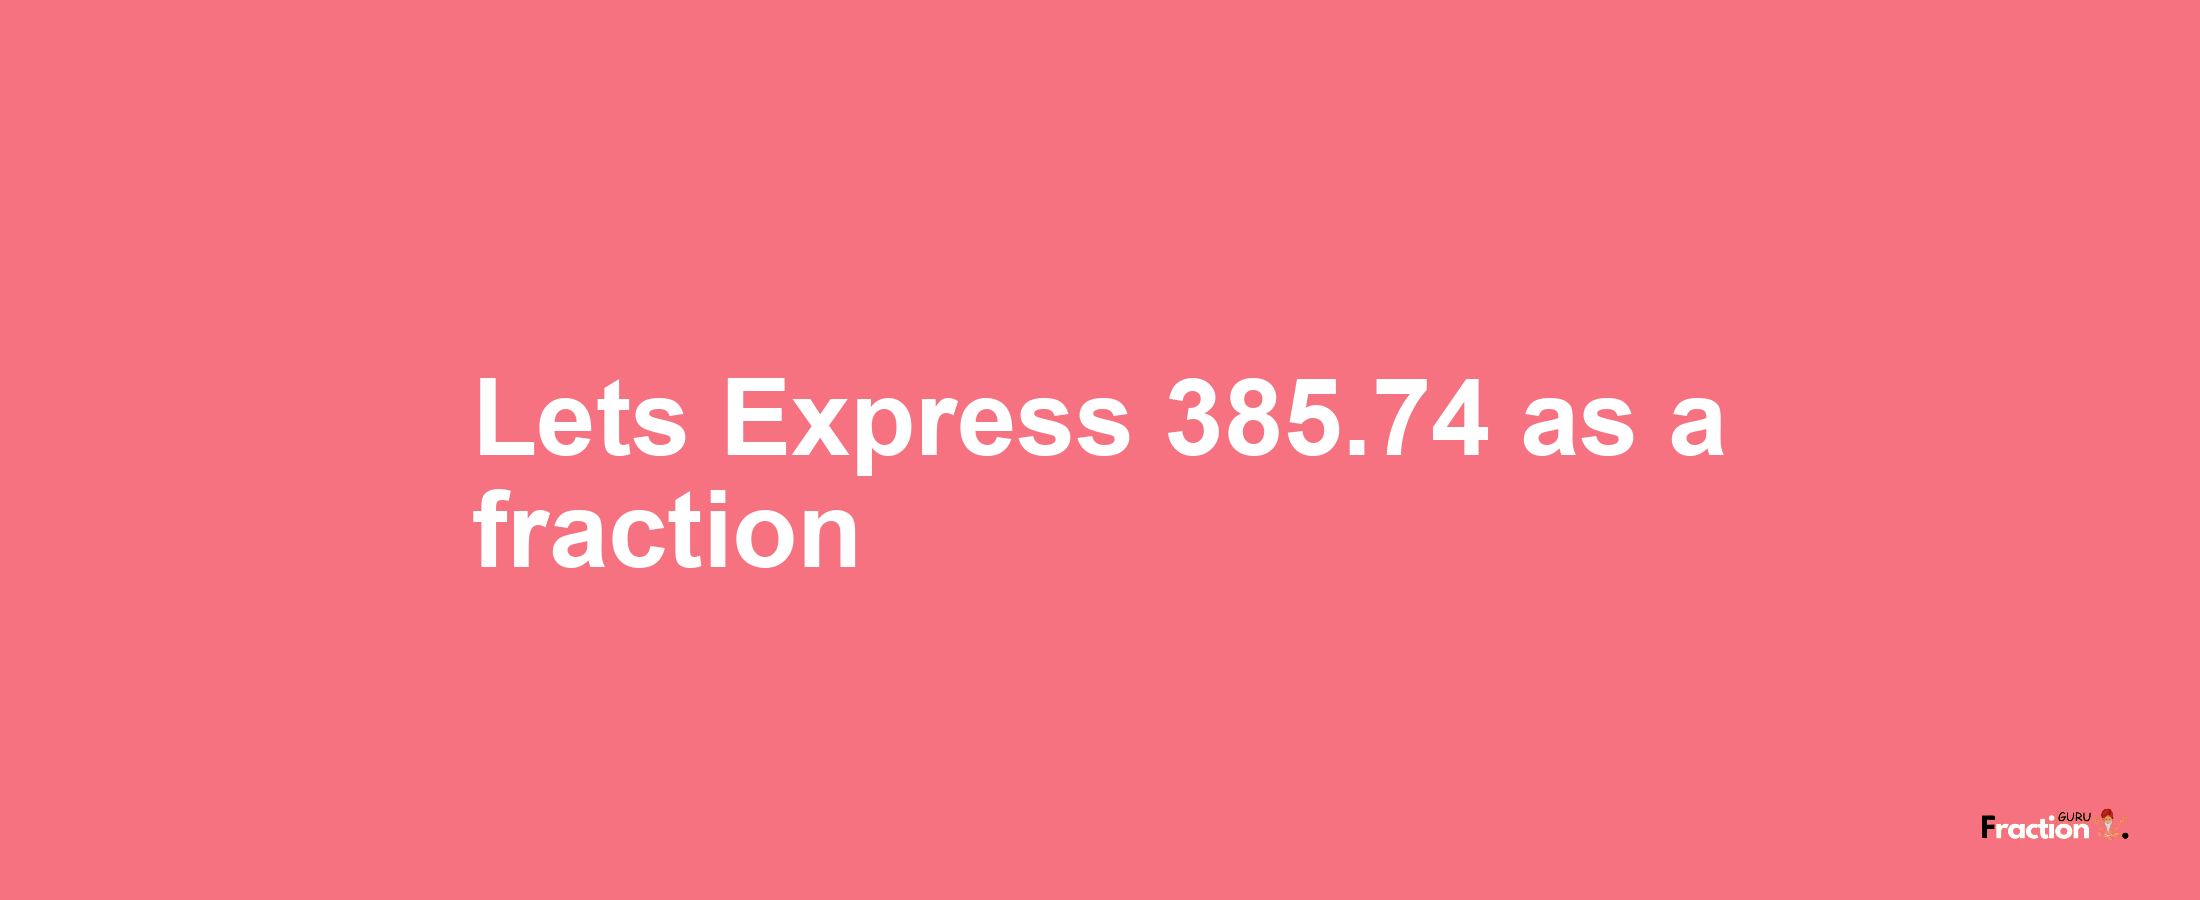 Lets Express 385.74 as afraction